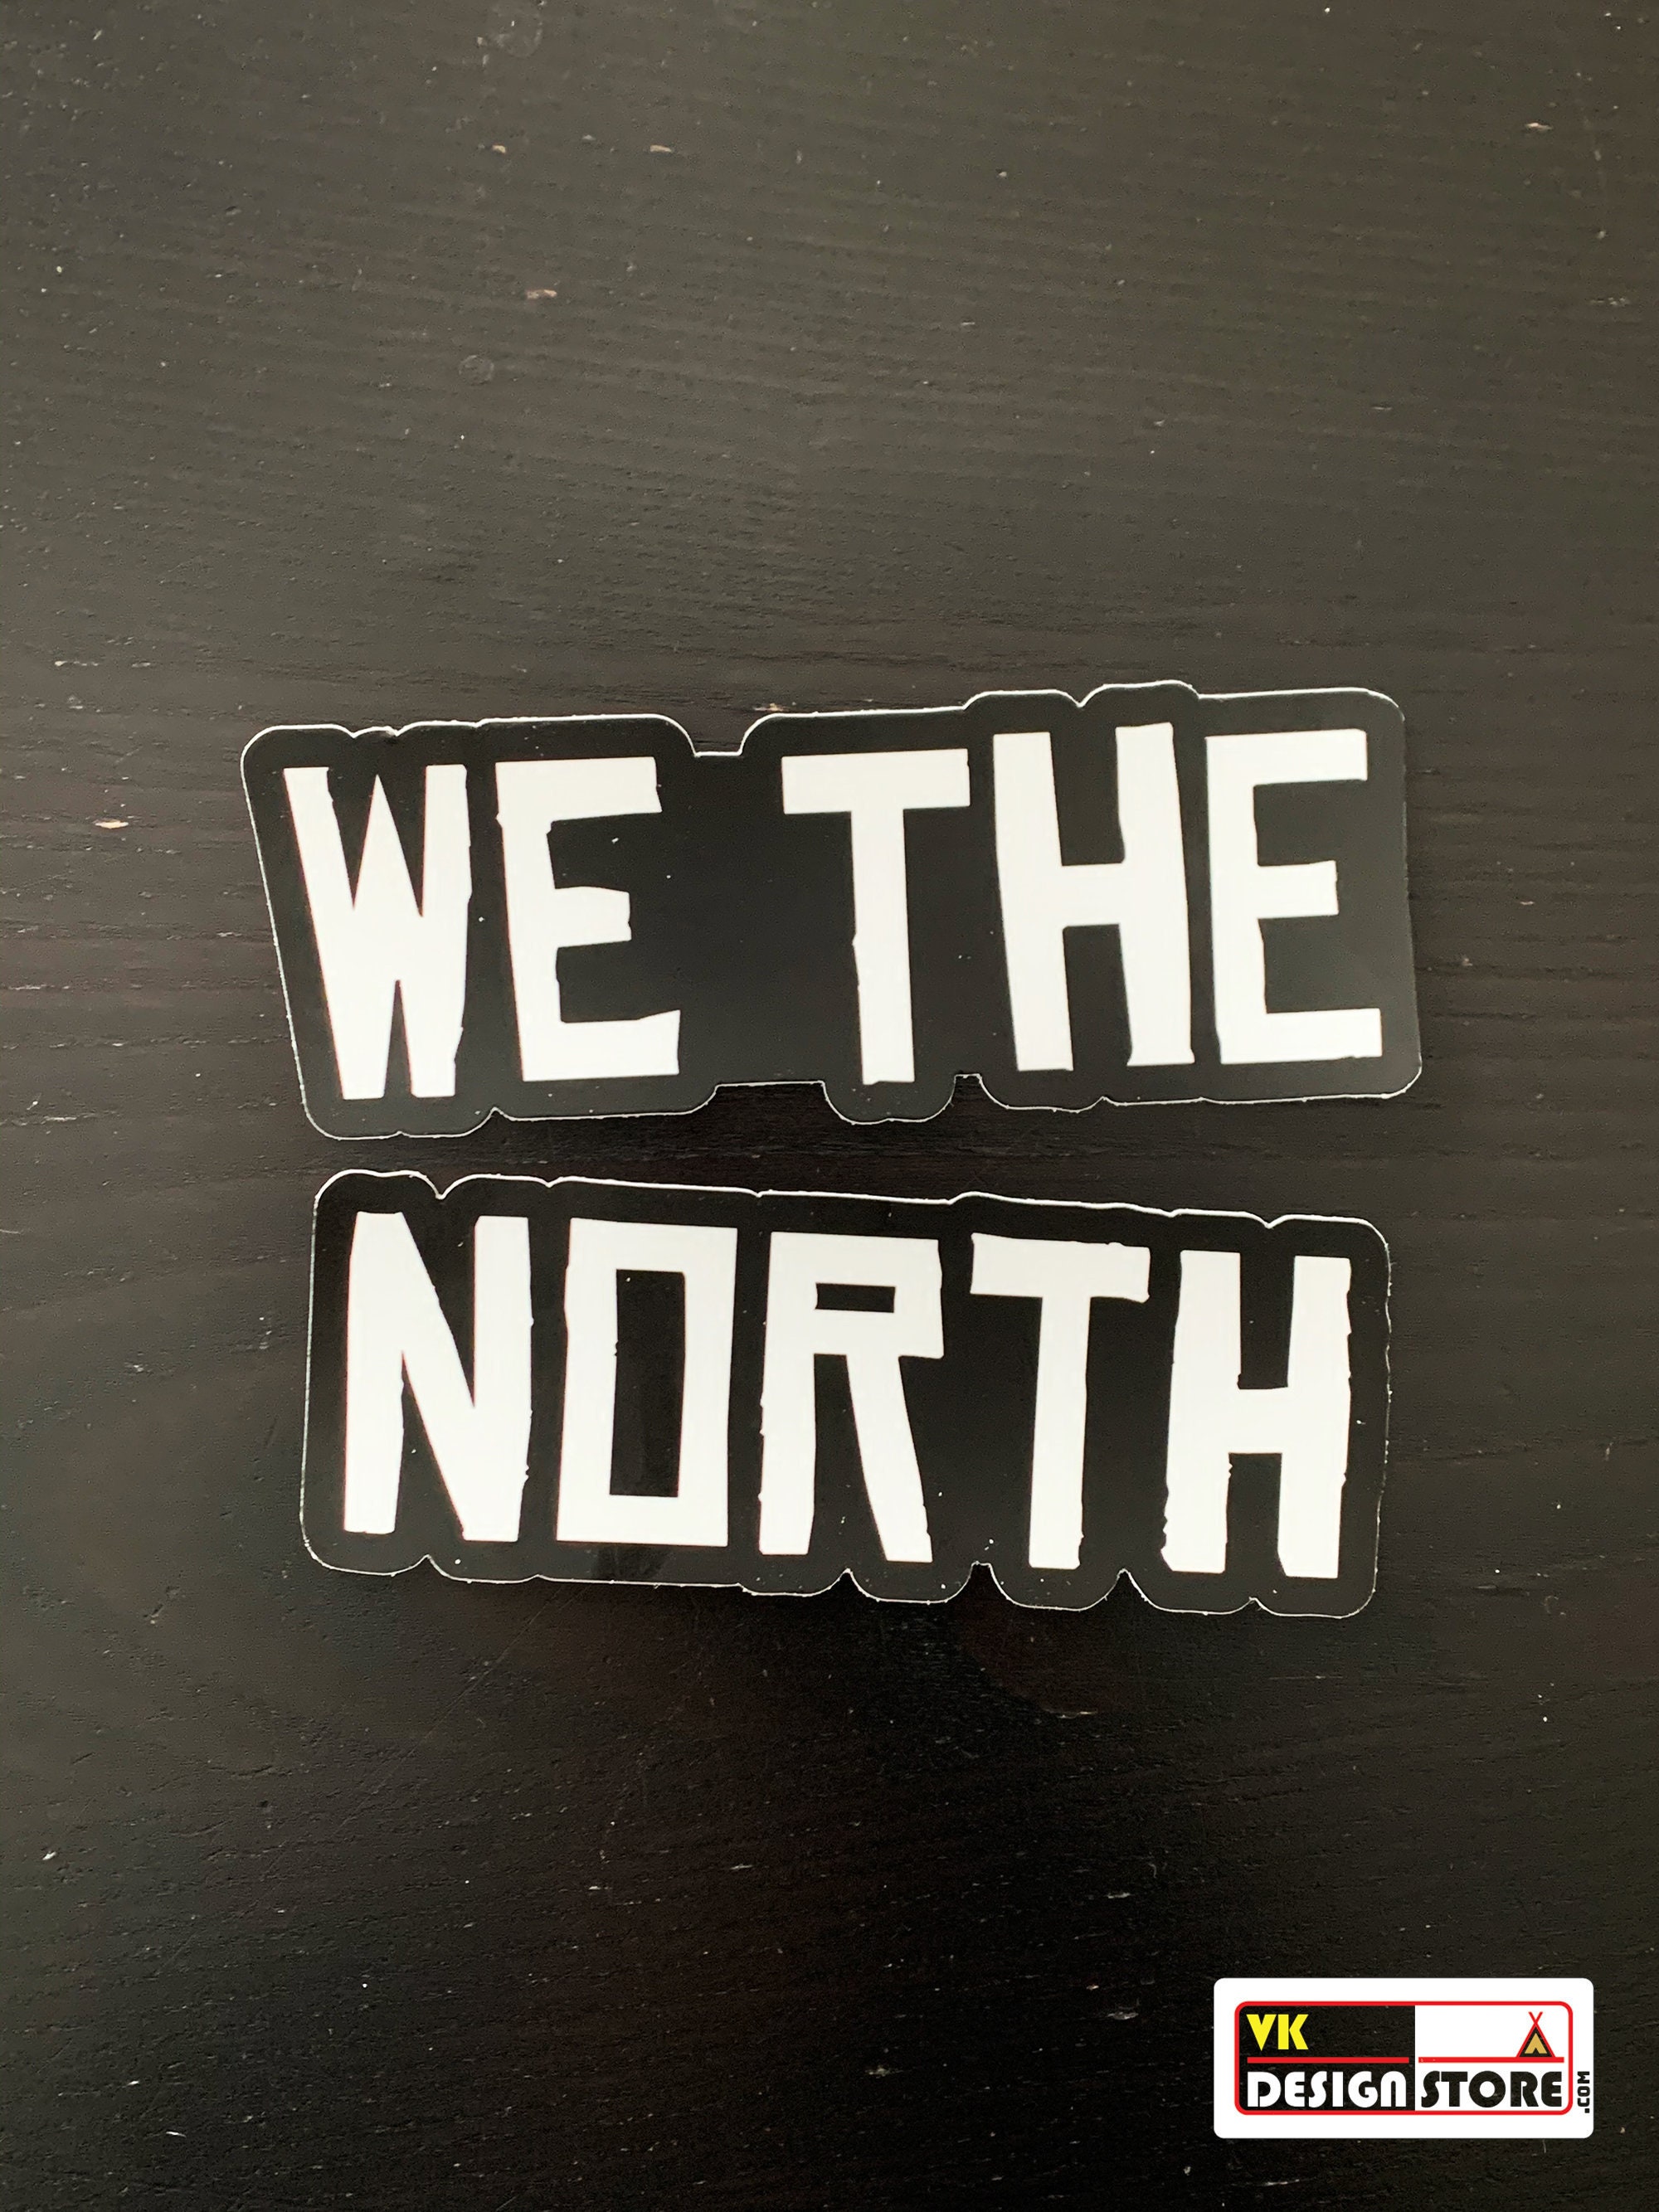 We The North shirts for fans of the Toronto Raptors sit on chairs